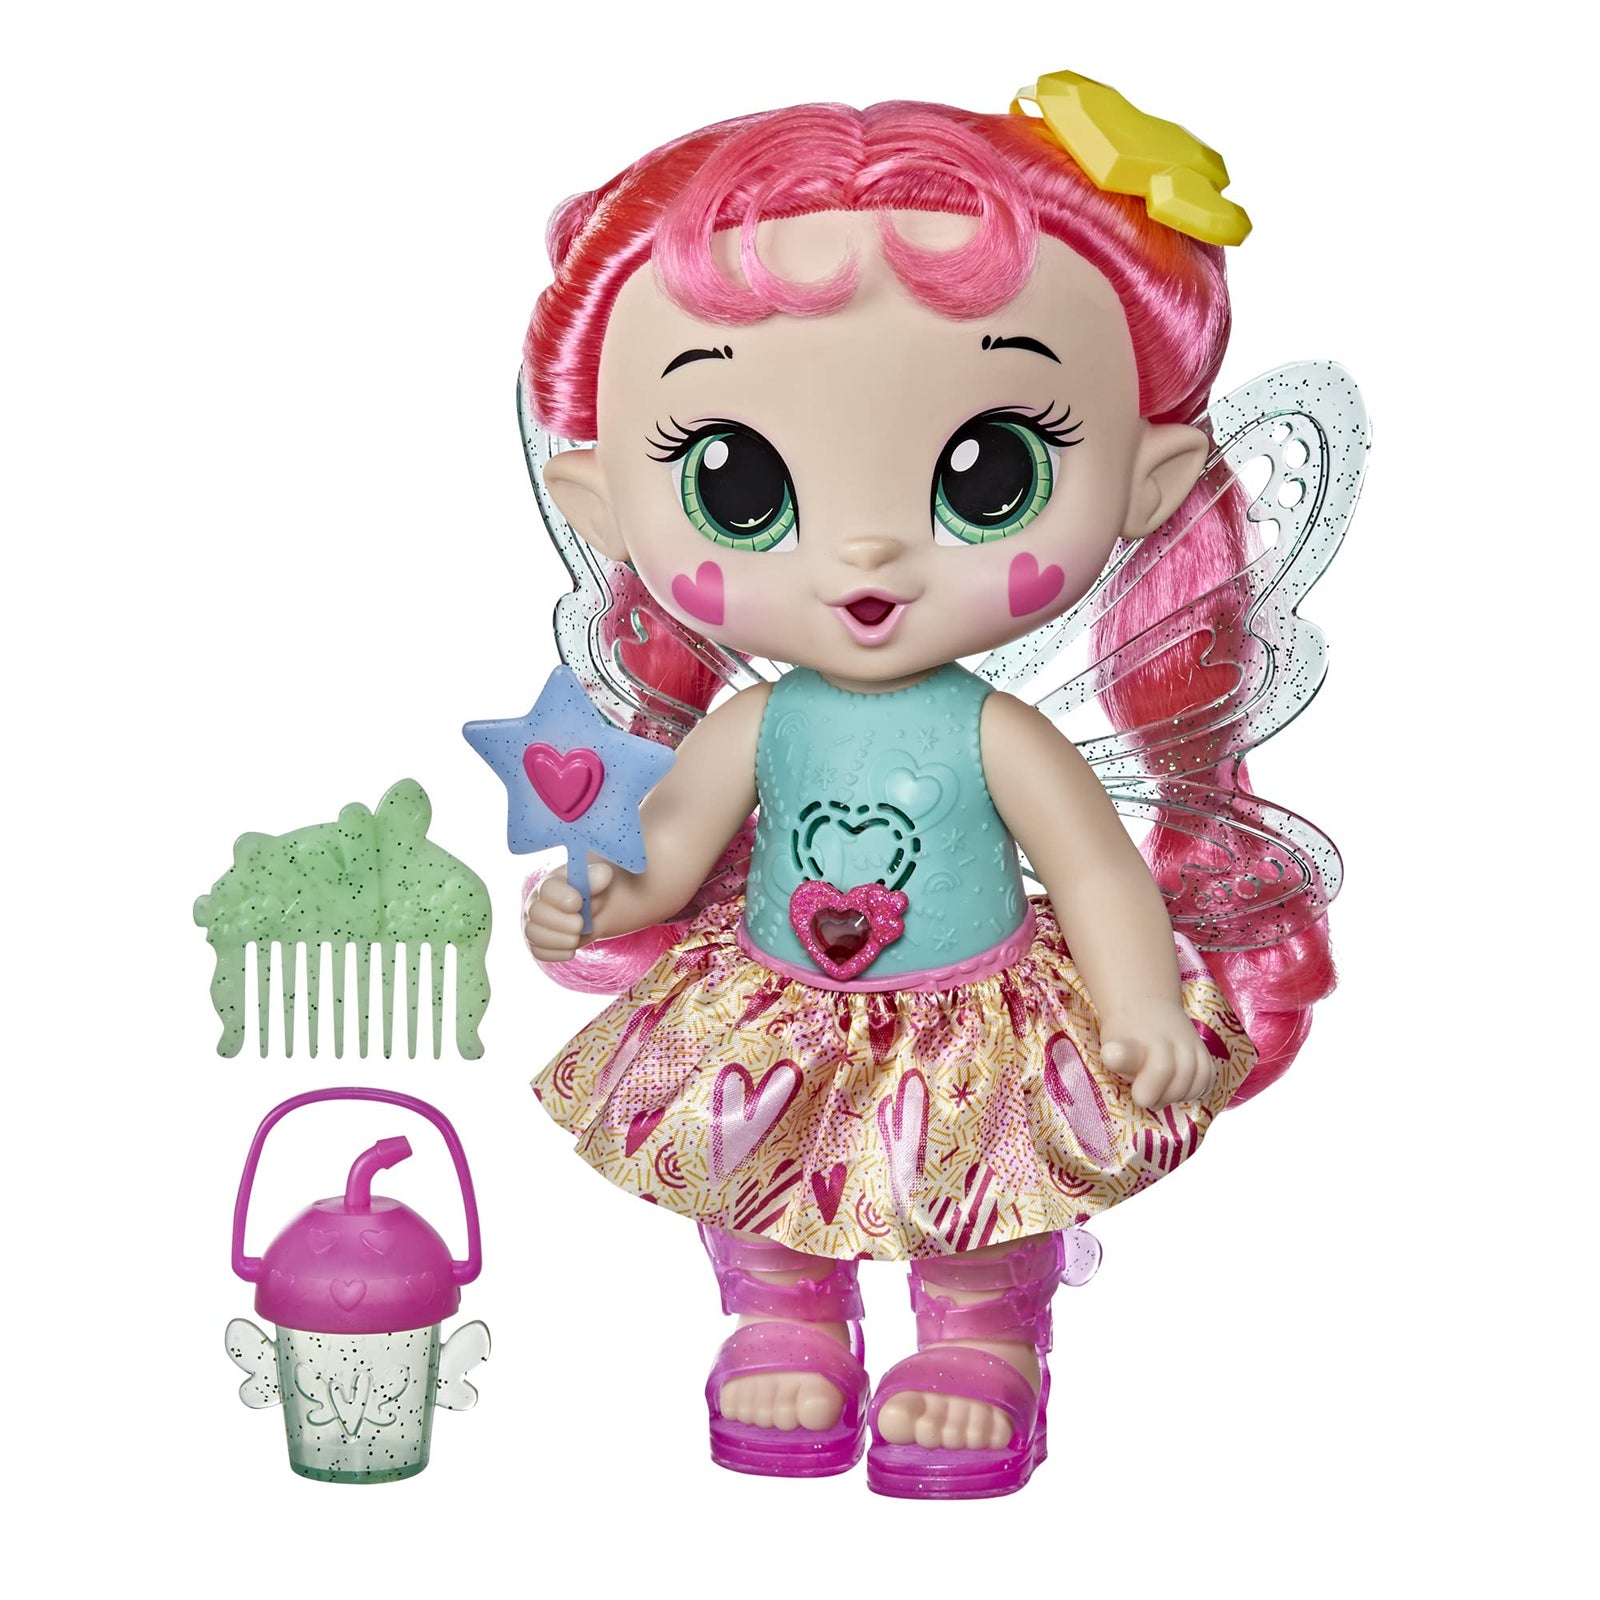 Baby Alive Glo Pixies Doll, Sammie Shimmer, Interactive 10.5-inch Pixie Doll Toy for Kids 3 and Up, 20 Sounds, Glows with Pretend Feeding